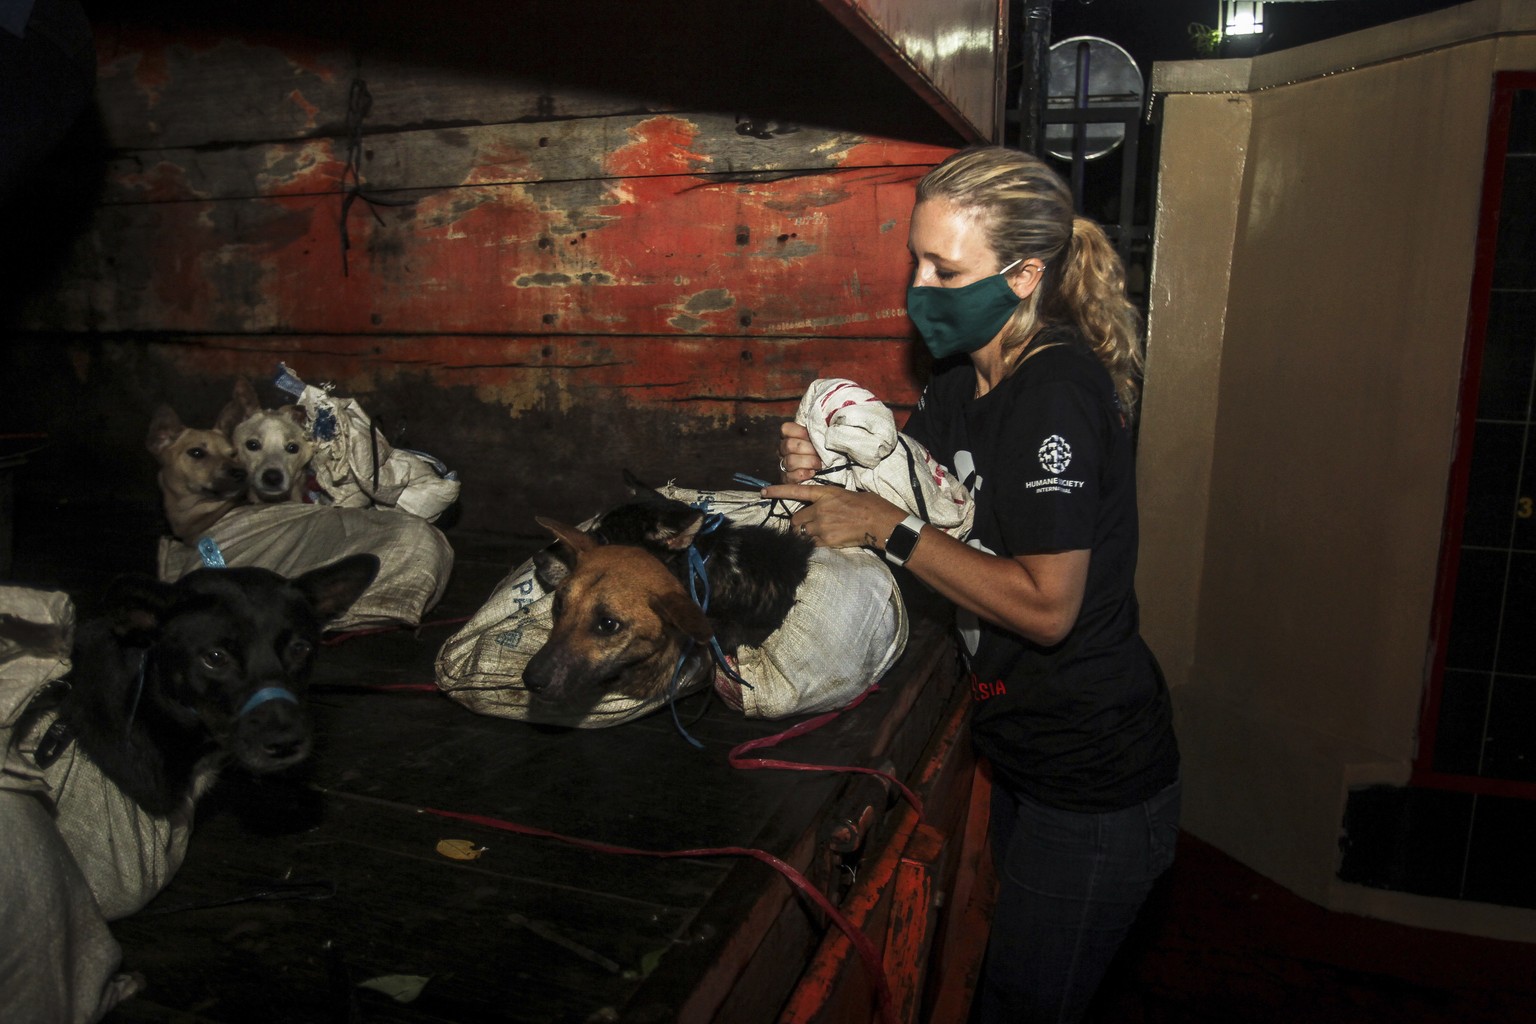 IMAGE DISTRIBUTED FOR THE HUMANE SOCIETY OF THE UNITED STATES - Members of the Dog Meat Free Indonesia coalition, including Lola Webber from DMFI member group Humane Society International, help rescue ...